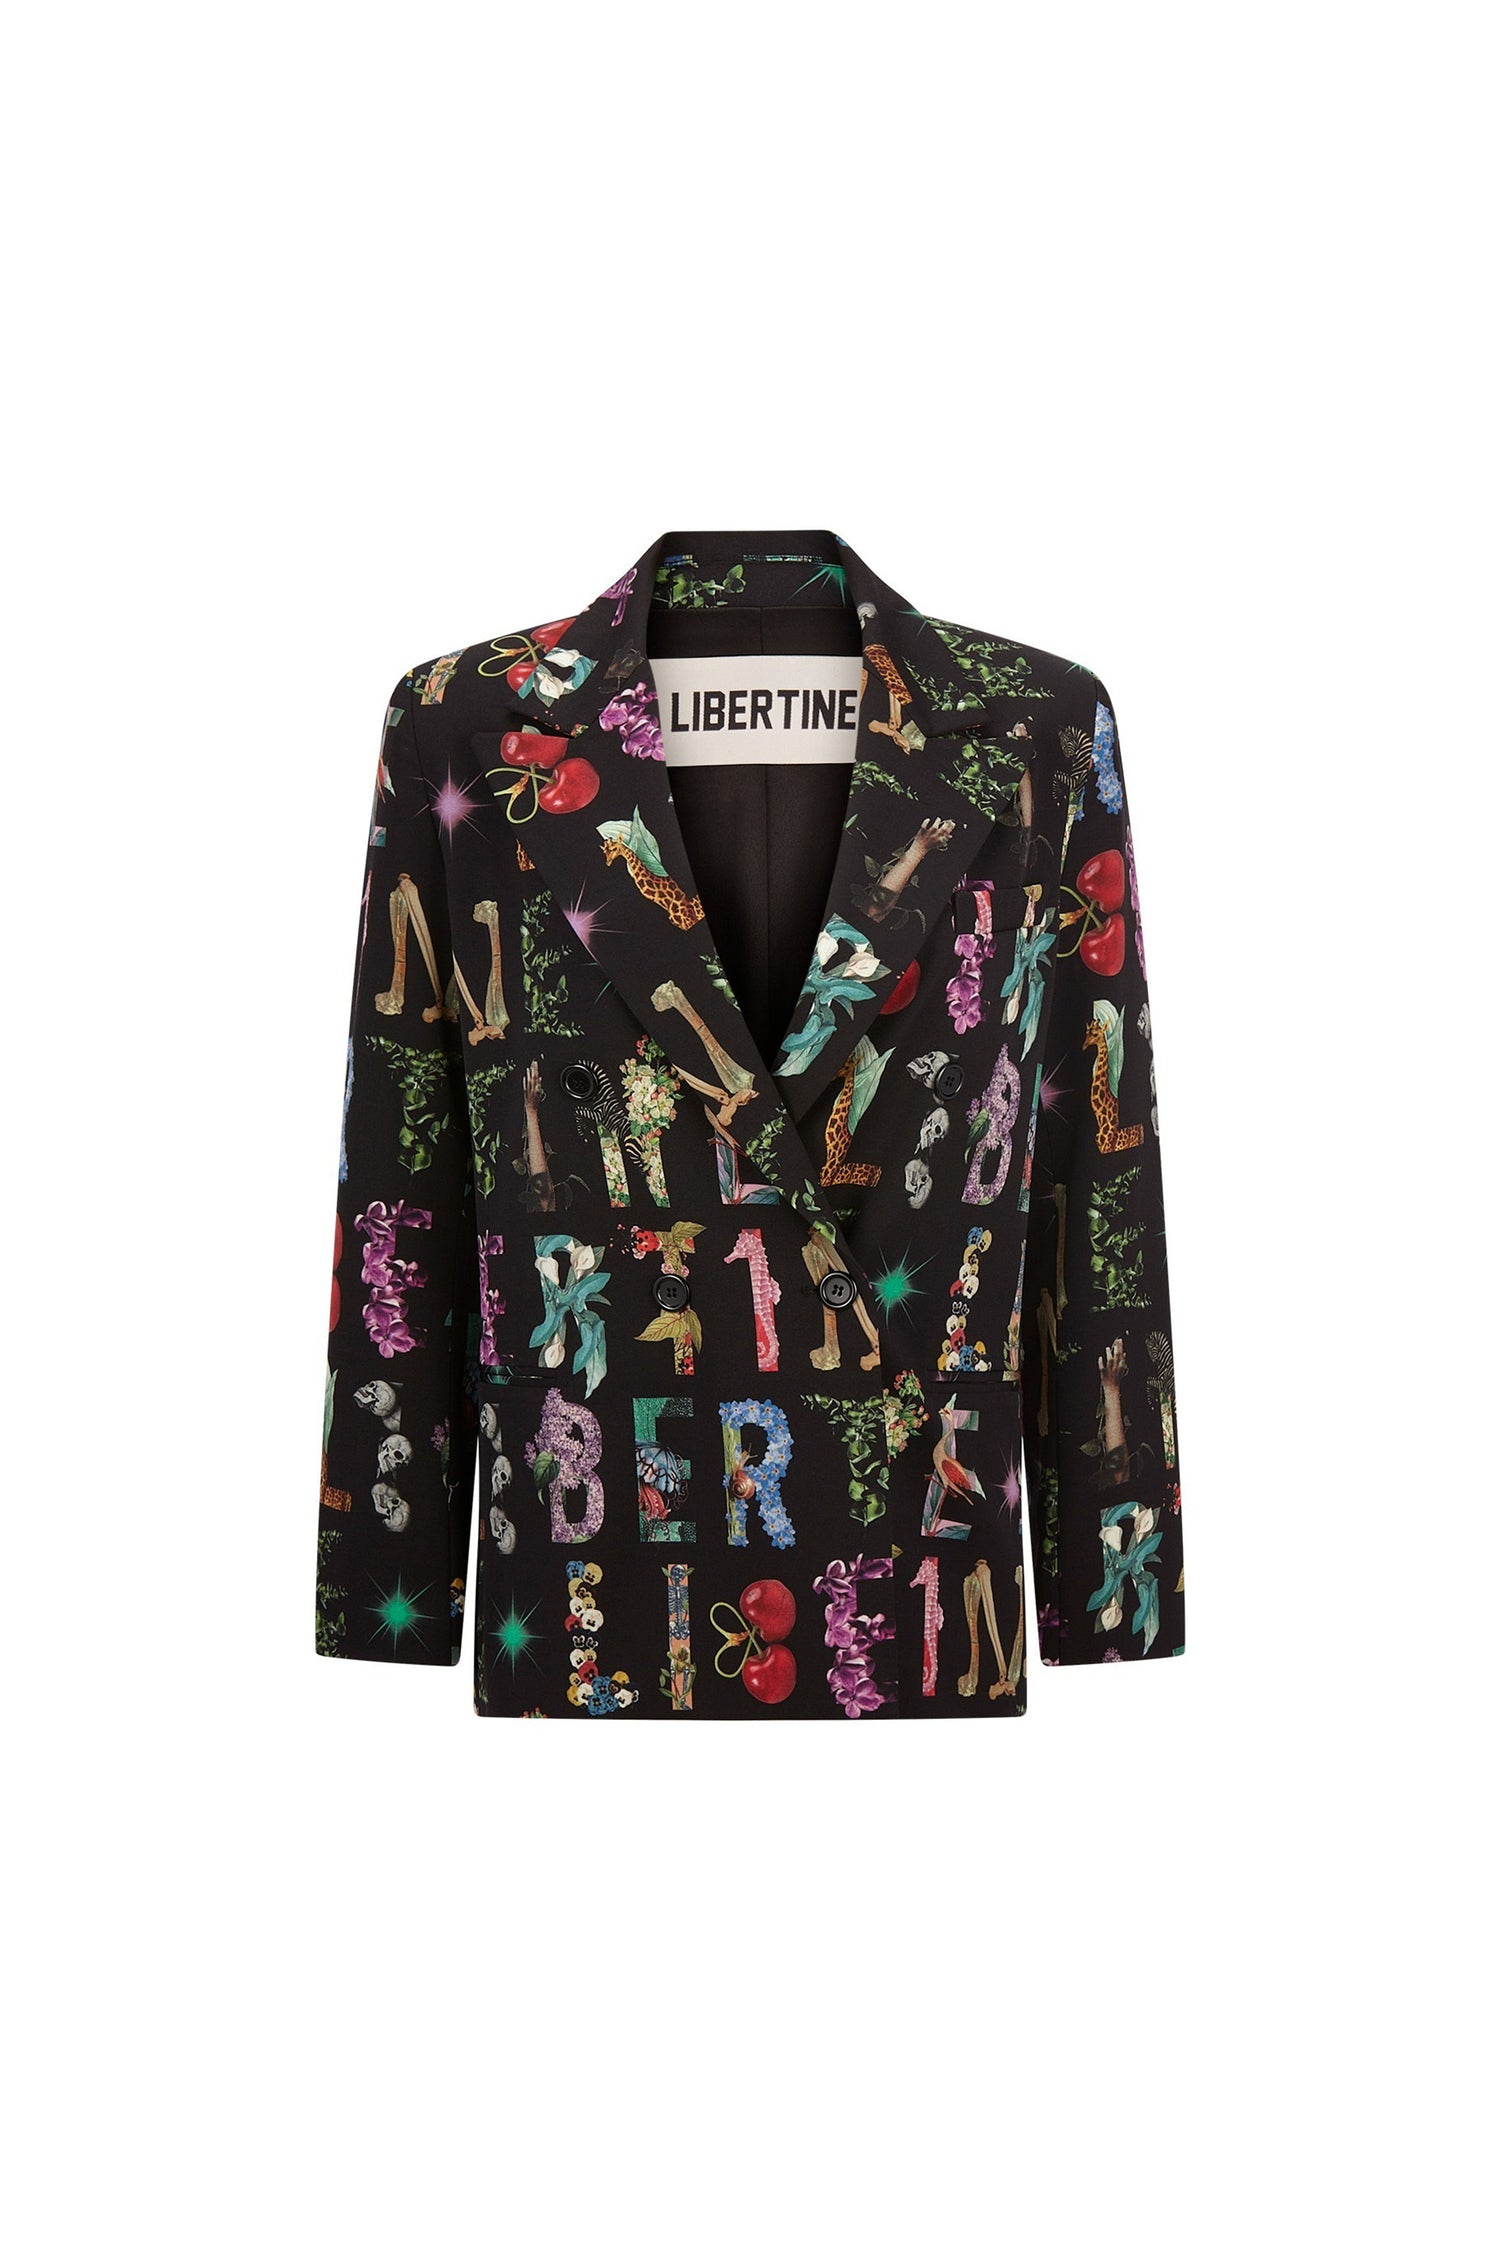 'DECO LETTERS' DOUBLE BREASTED JACKET -  - Libertine